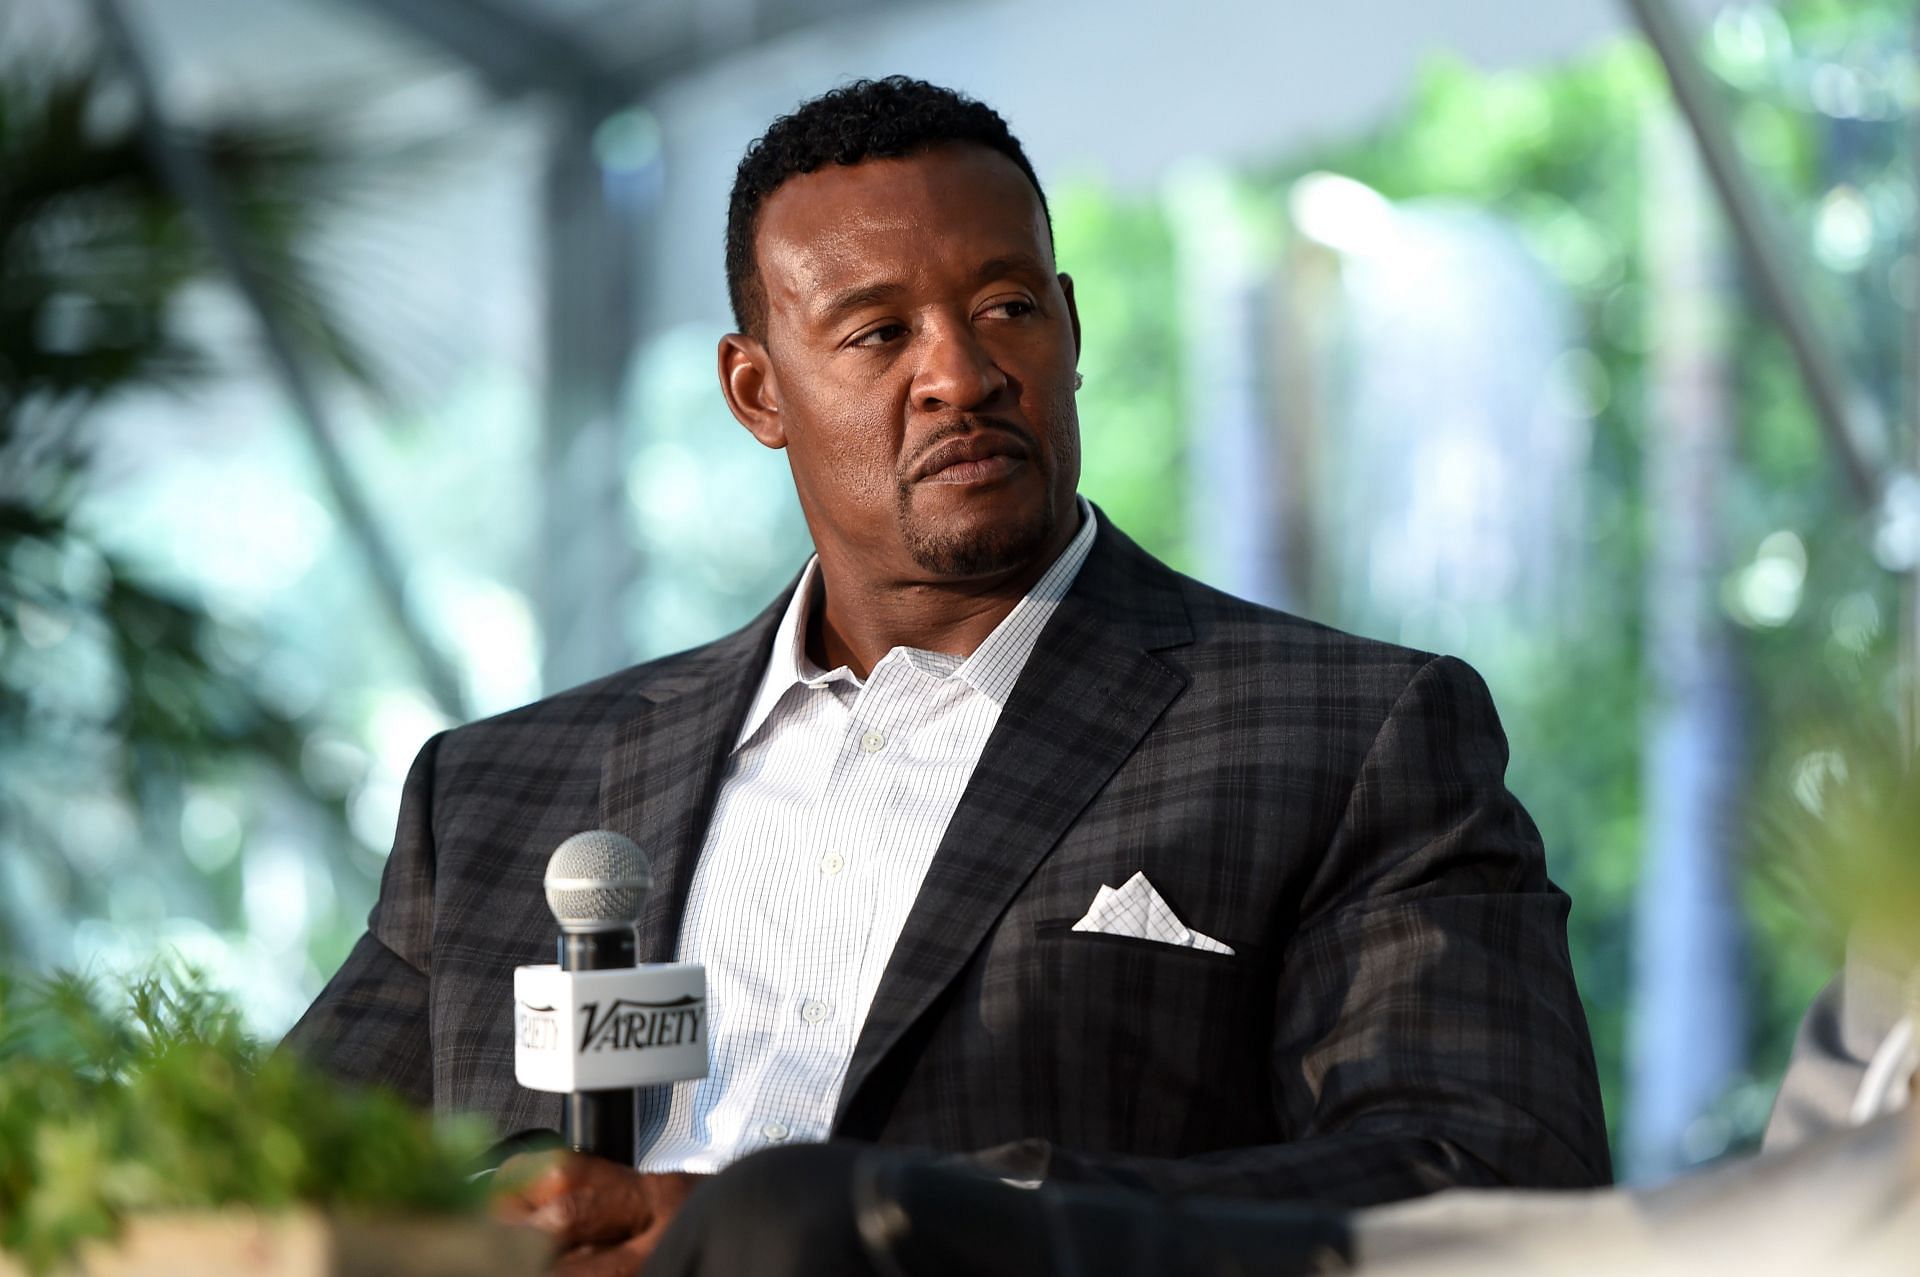 Willie McGinest breaks silence, apologizes for jumping man in